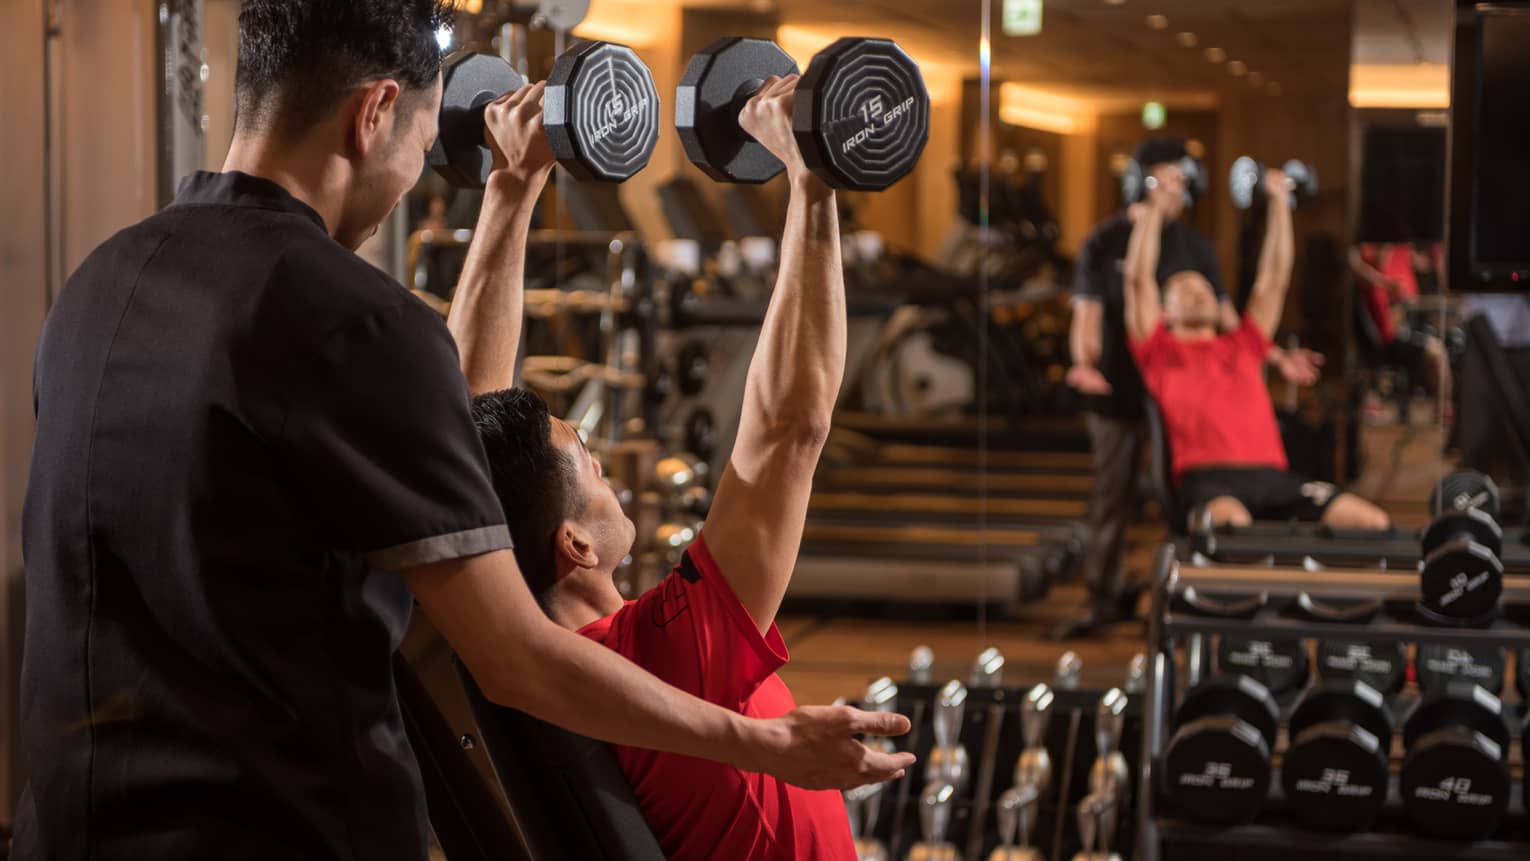 Man in chair in front of mirror lifts two 15 lb. weights above his head while personal trainer assists